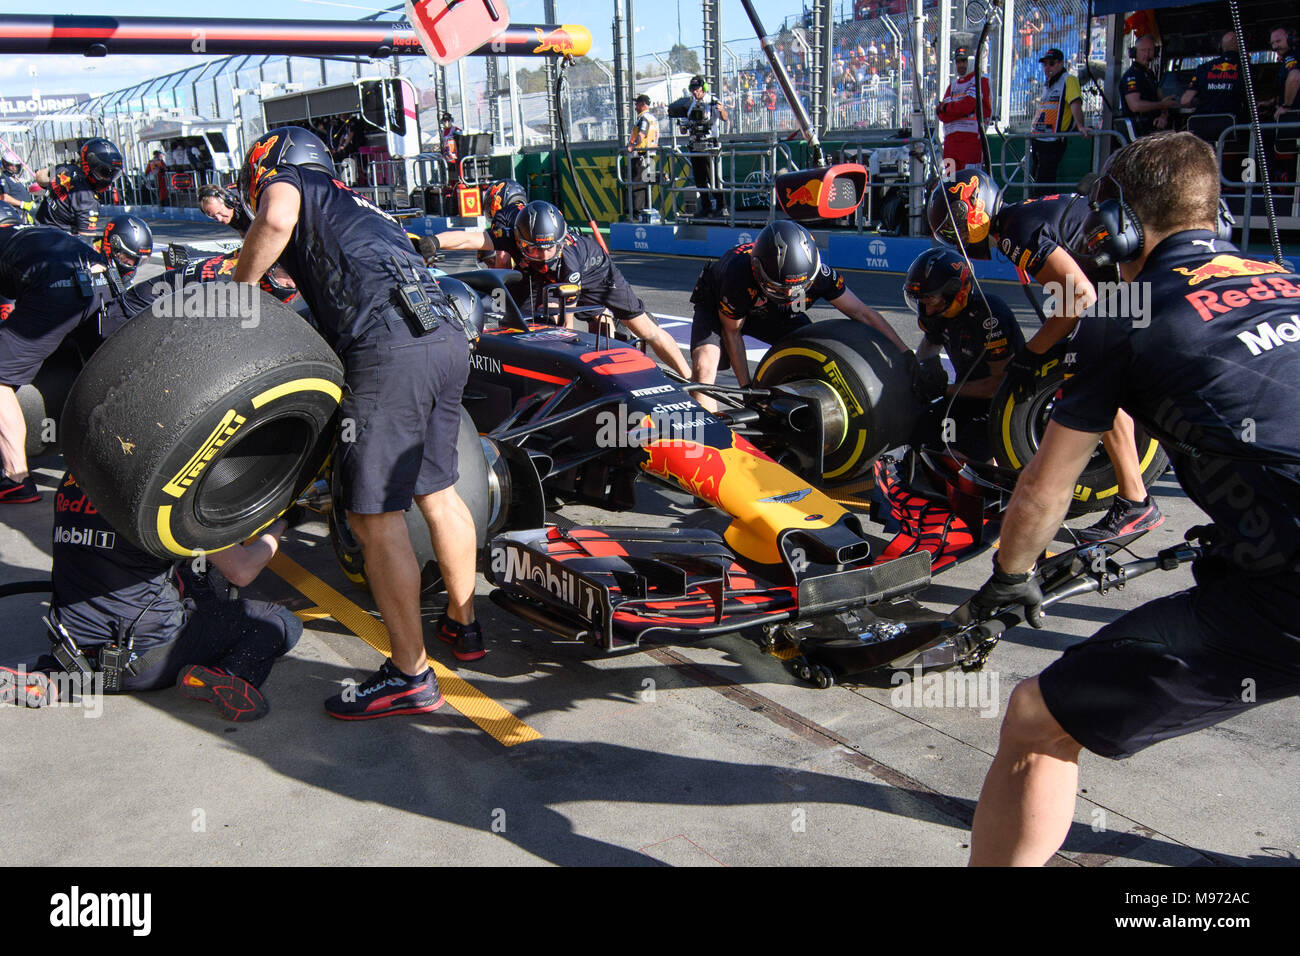 Albert Park, Melbourne, Australia. 23rd Mar, 2018. Daniel Ricciardo (AUS) #3 from the Aston Martin Red Bull Racing team practises a pit stop during practice session two at the 2018 Australian Formula One Grand Prix at Albert Park, Melbourne, Australia. Sydney Low/Cal Sport Media/Alamy Live News Stock Photo